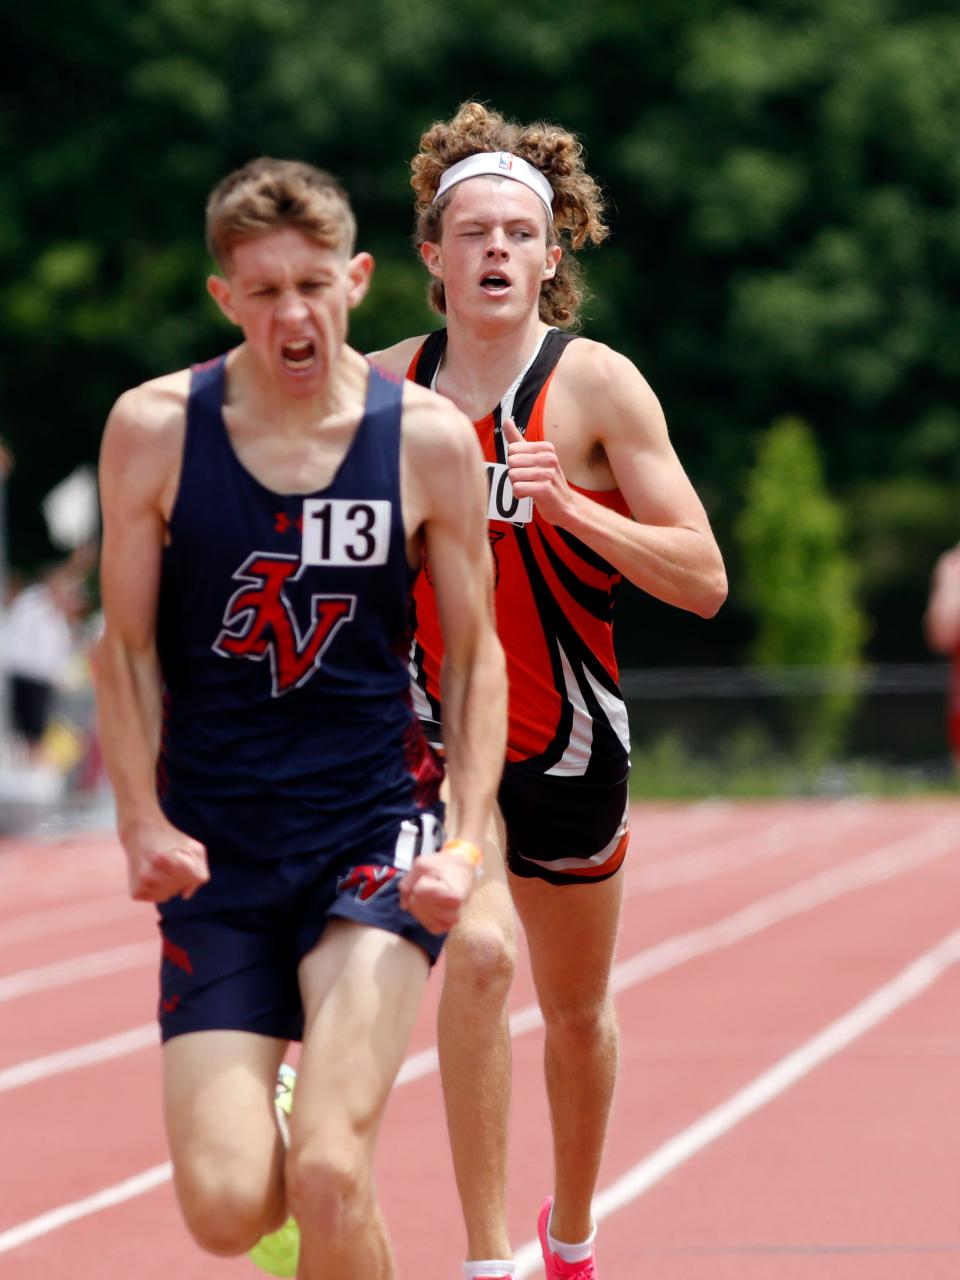 Waverly's Mitch Green is edged at the finish line by Gnadenhutten Indian Valley's Xander Heil en route to a second-place finish in the 1,600 meters during the Division II regional track and field meet on Saturday at McConagha Stadium in New Concord.